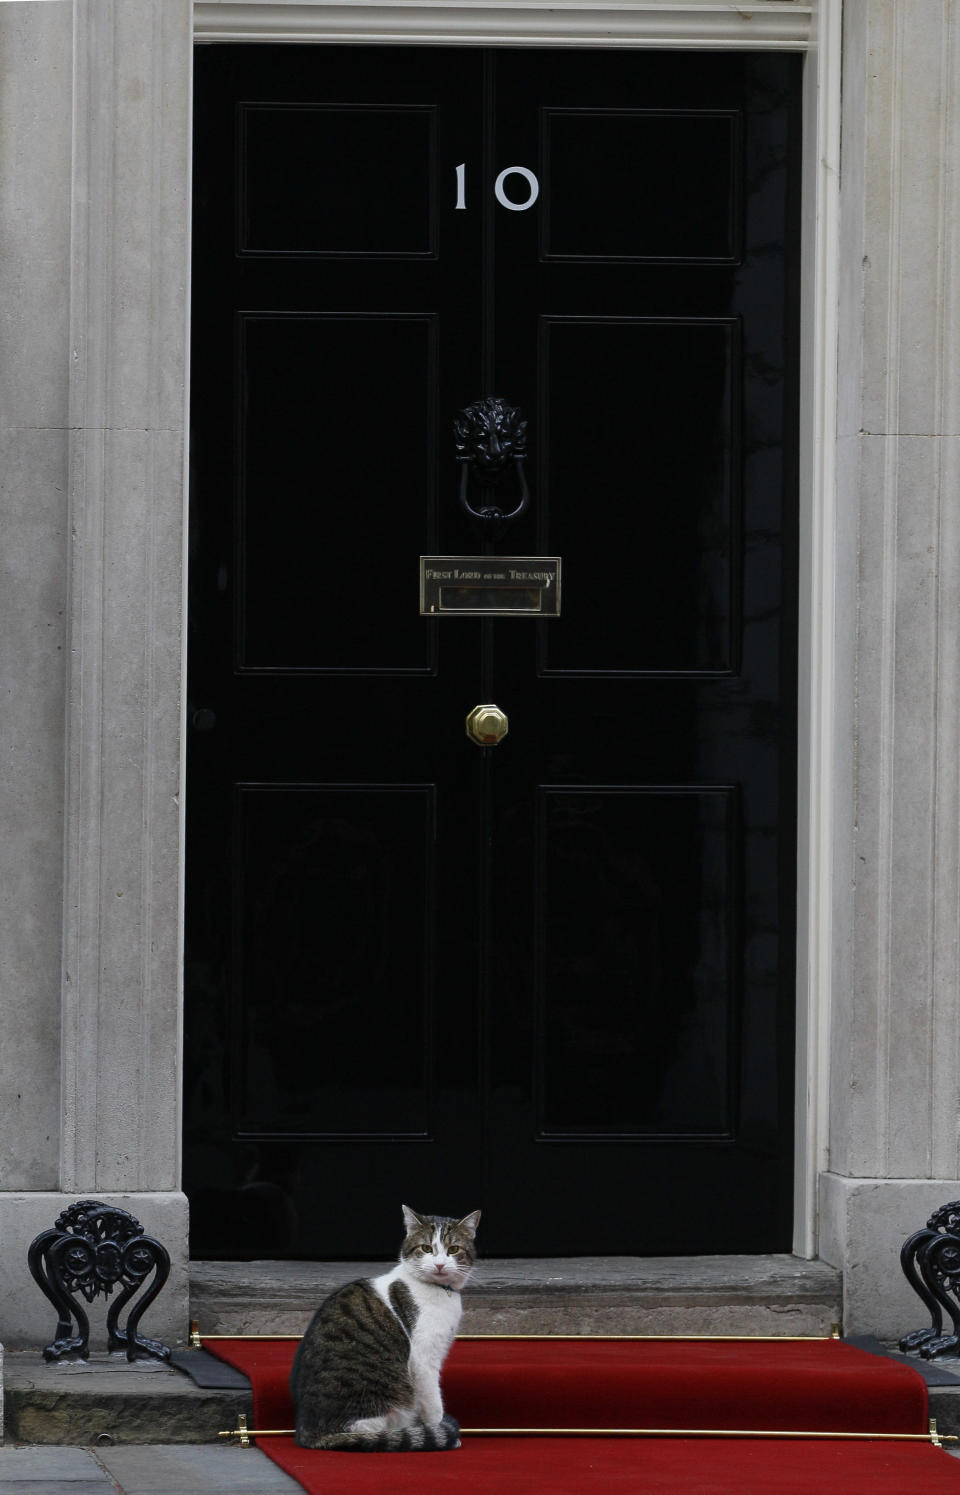 FILE - In this Monday, Jan. 16, 2012 file photo, Larry the cat sits on the red carpet as he awaits Palestinian President Mahmoud Abbas at Downing Street in London. Monday, Feb. 15, 2021 marks the 10th anniversary of rescue cat Larry becoming Chief Mouser to the Cabinet Office in a bid to deal with a rat problem at 10 Downing Street. (AP Photo/Kirsty Wigglesworth, file)